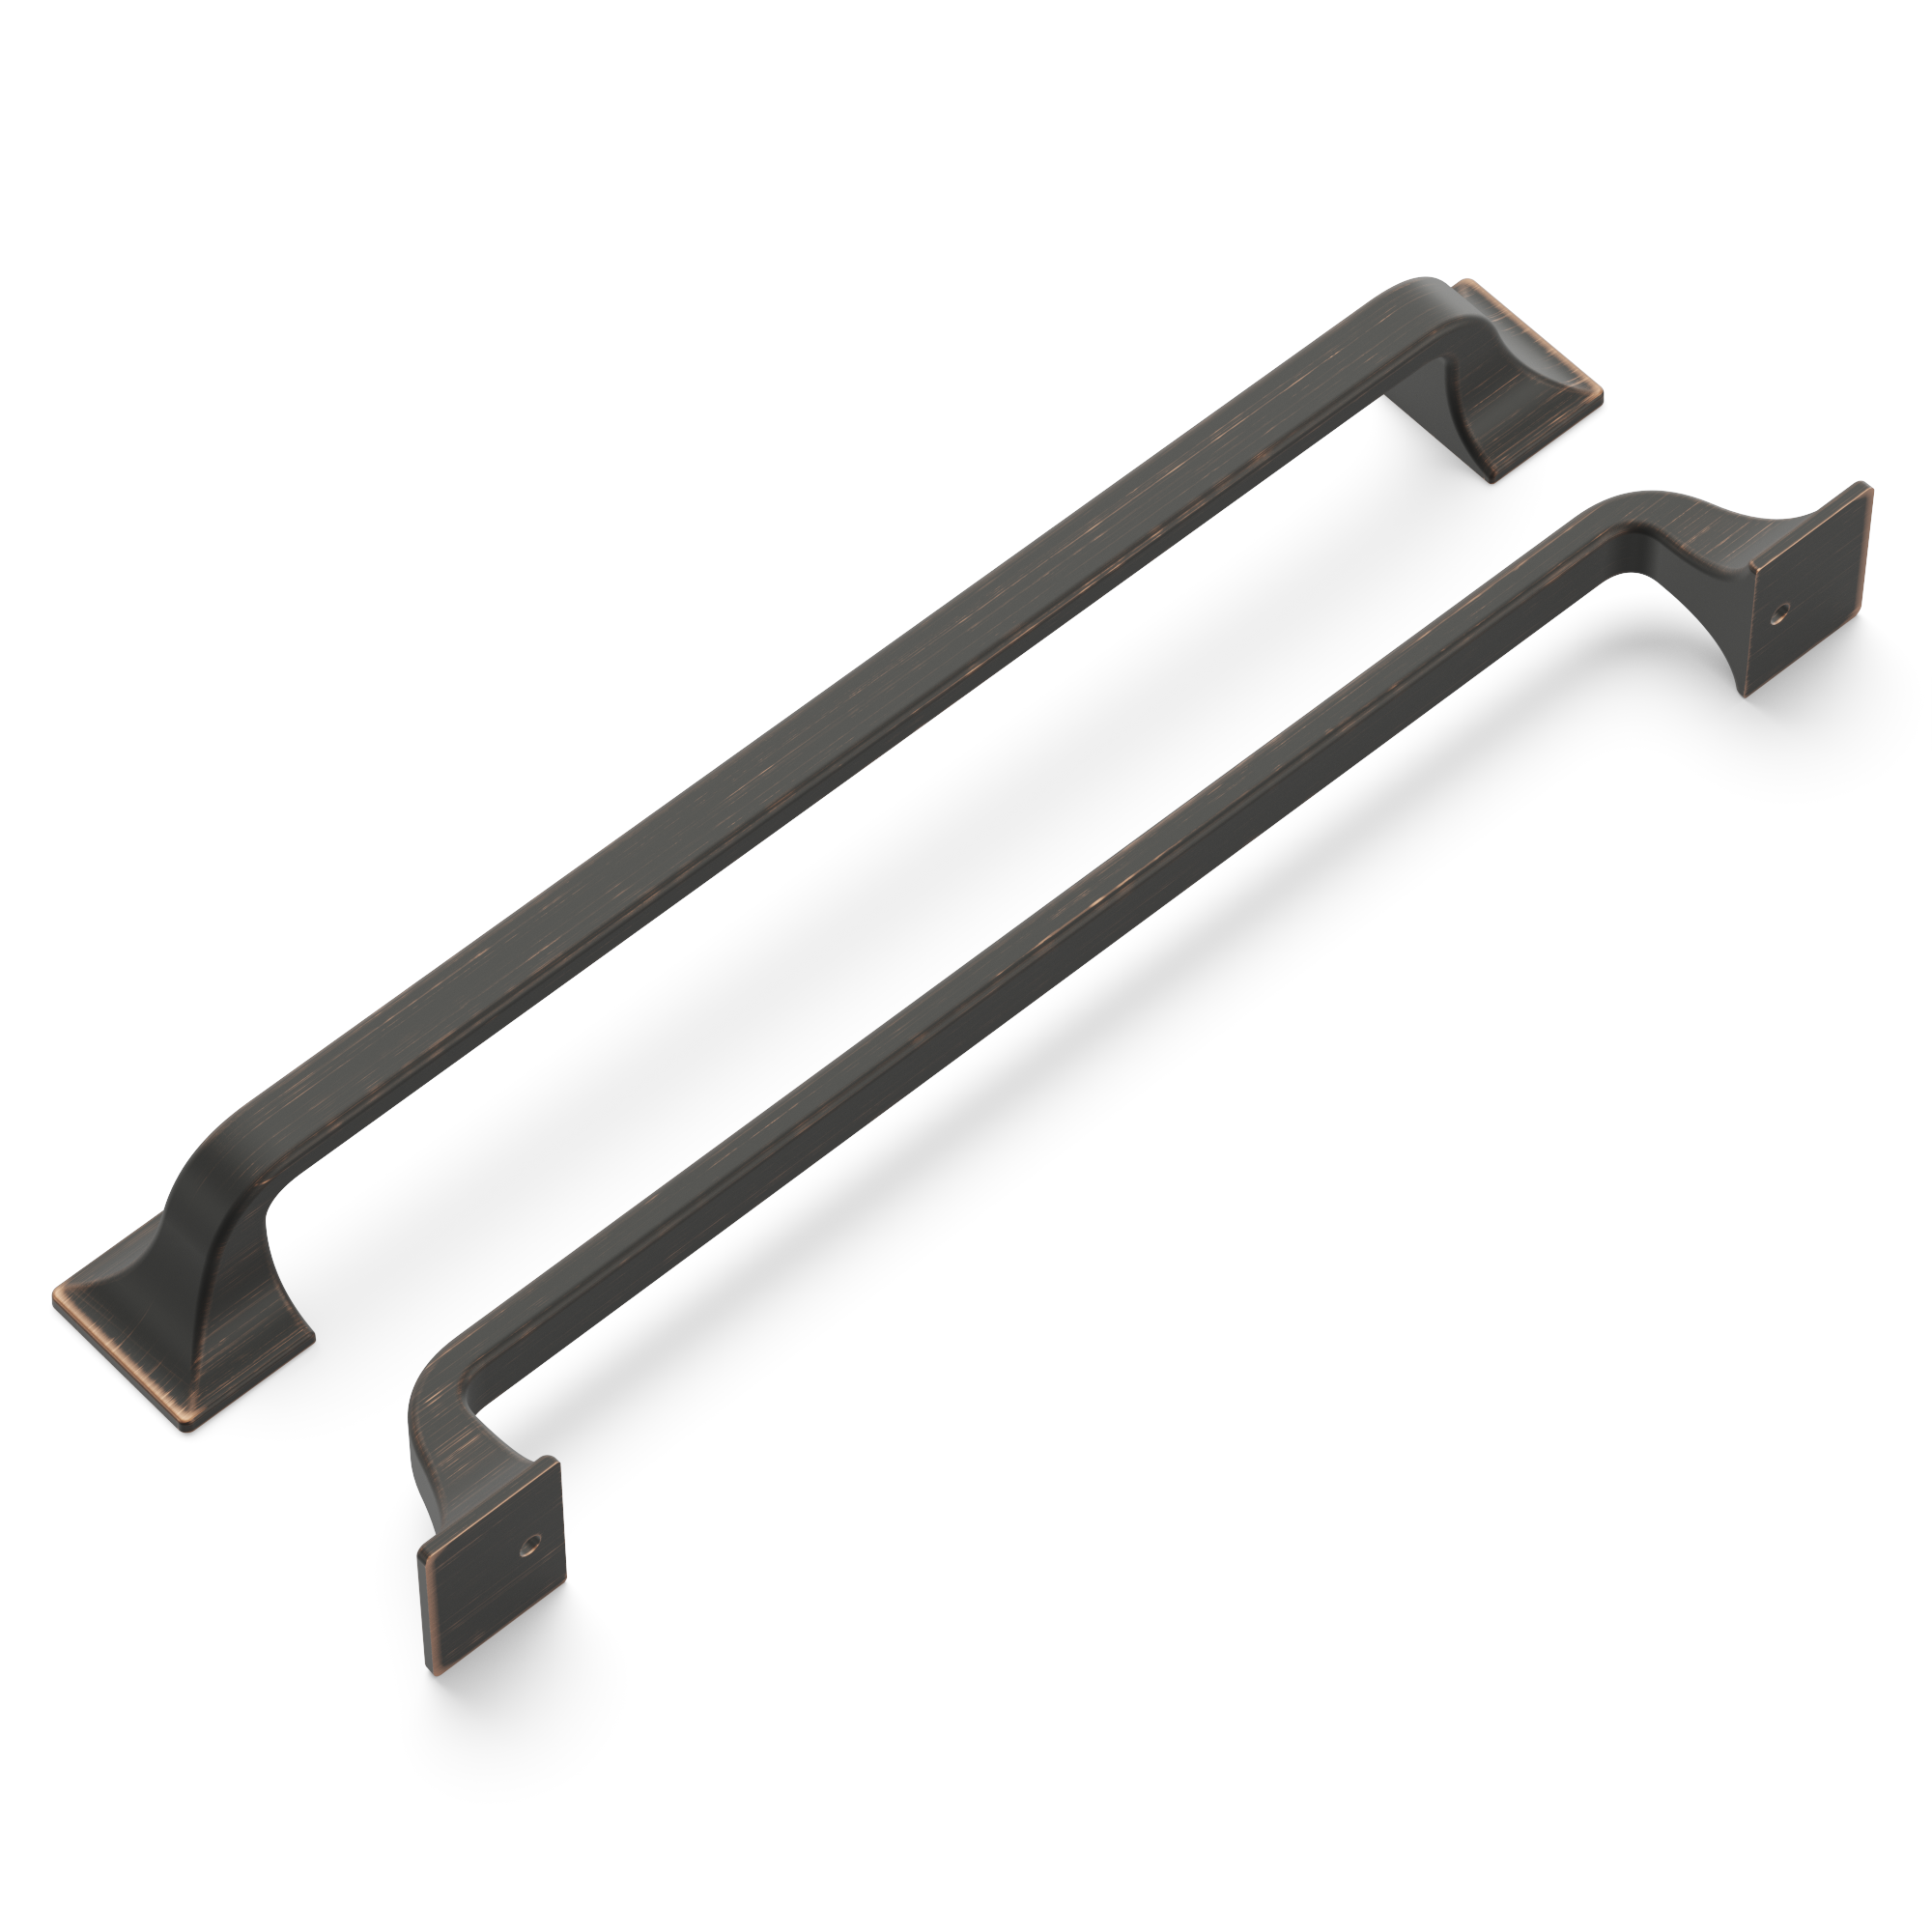 5-1/16 inch (128mm) Forge Cabinet Pull